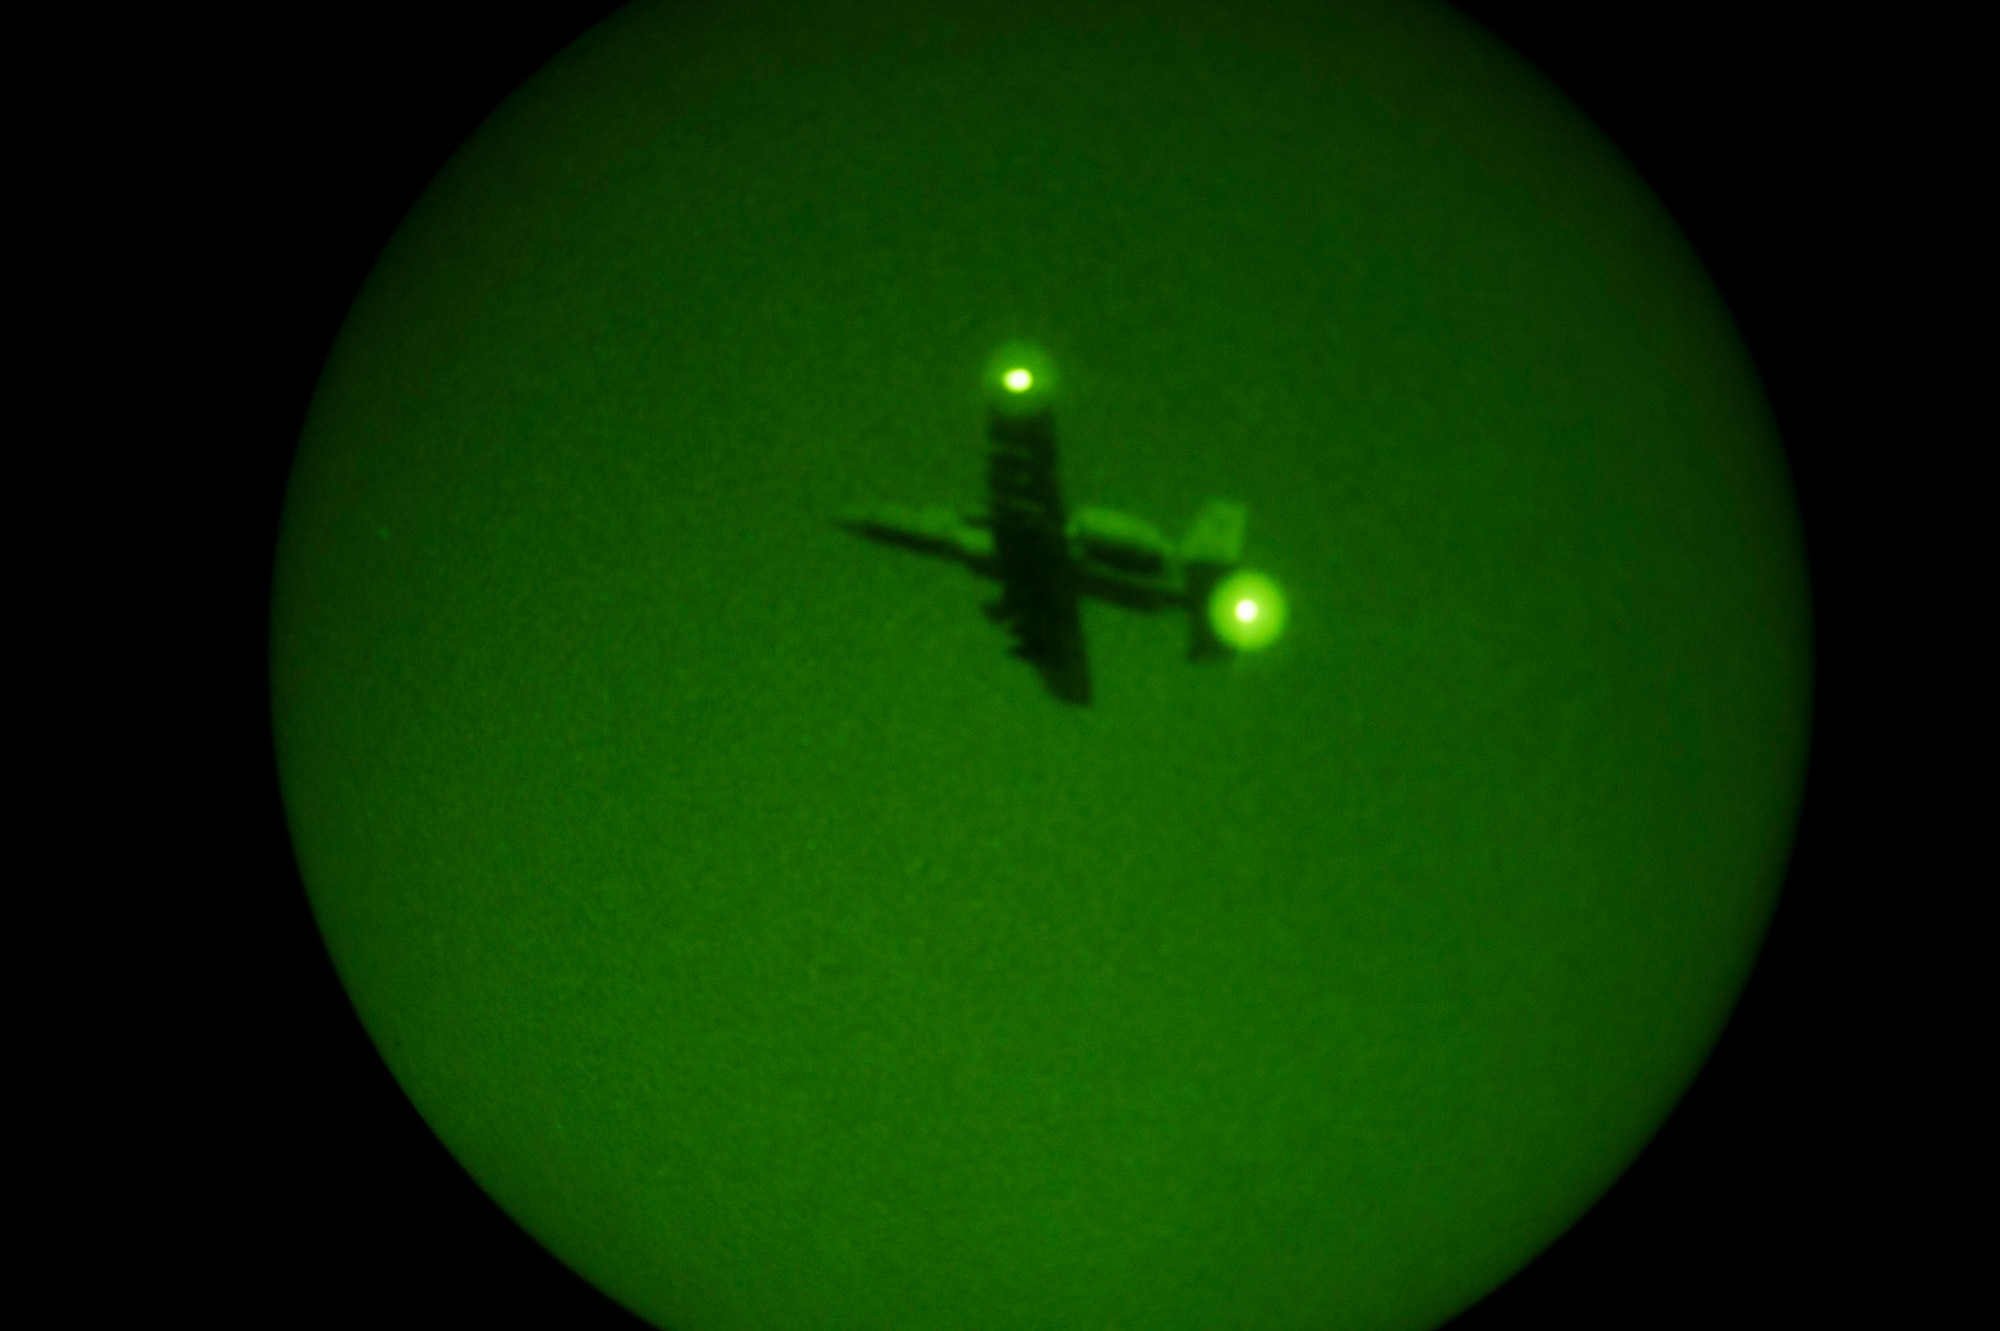 A 354th Expeditionary Fighter Squadron A-10C Thunderbolt II aircraft flies overhead at night during an austere landing training exercise at Nowe Miasto, Poland, July 20, 2015. During night hours, pilots will use night vision goggles to land on an unimproved surface when no light is available. (U.S. Air Force photo by Airman 1st Class Luke Kitterman/Released)